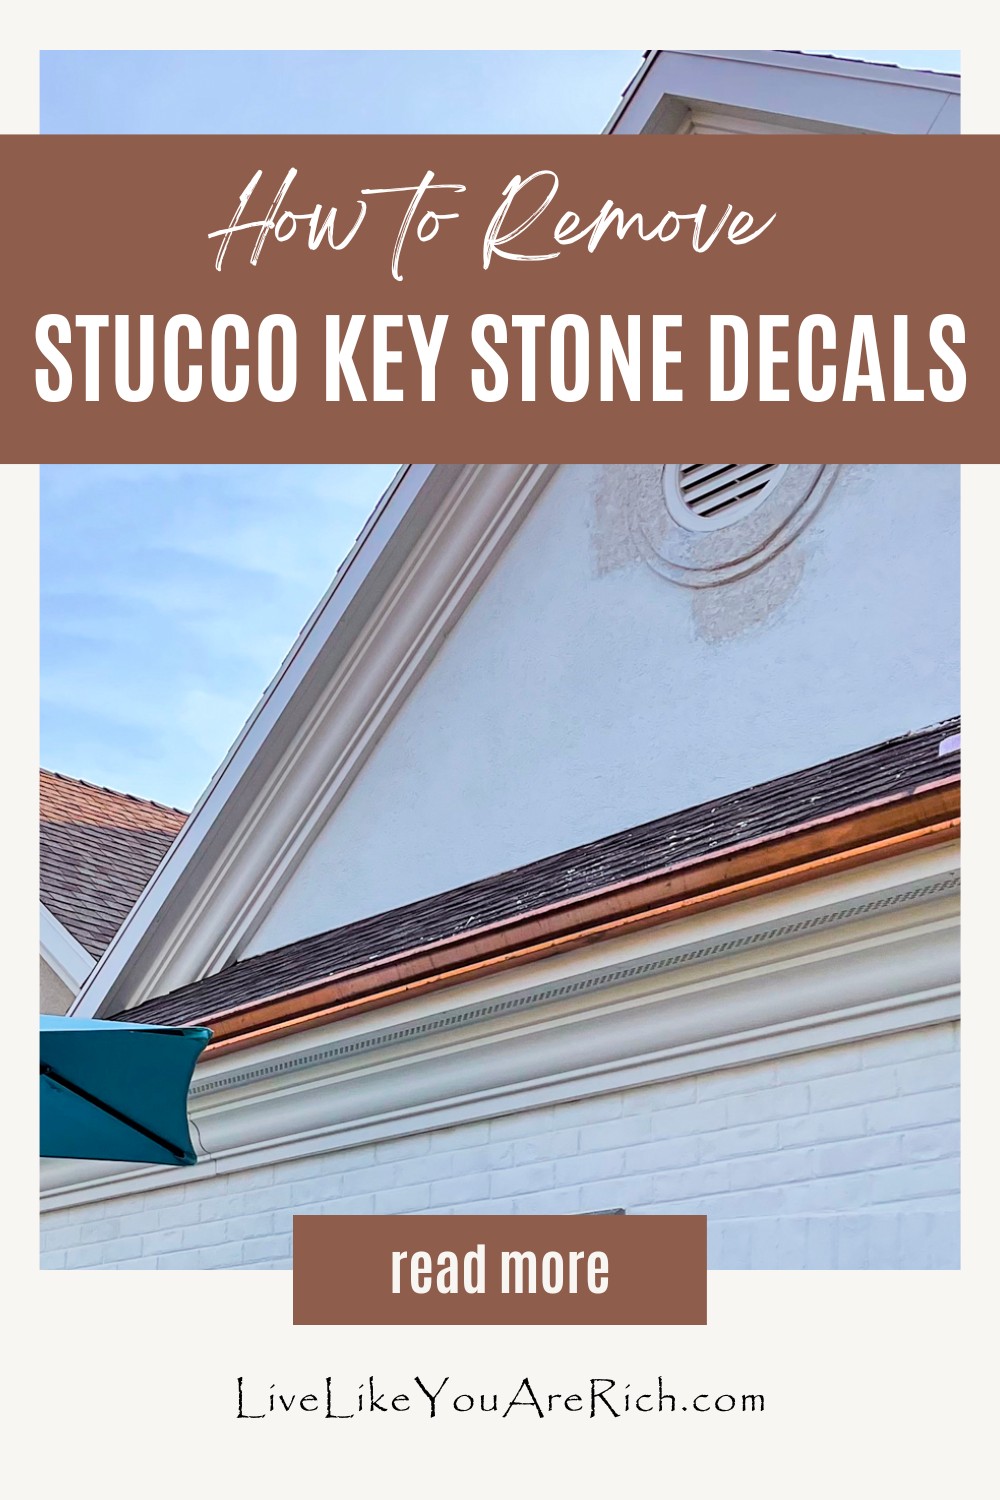 How to Remove Stucco Key Stone Decals